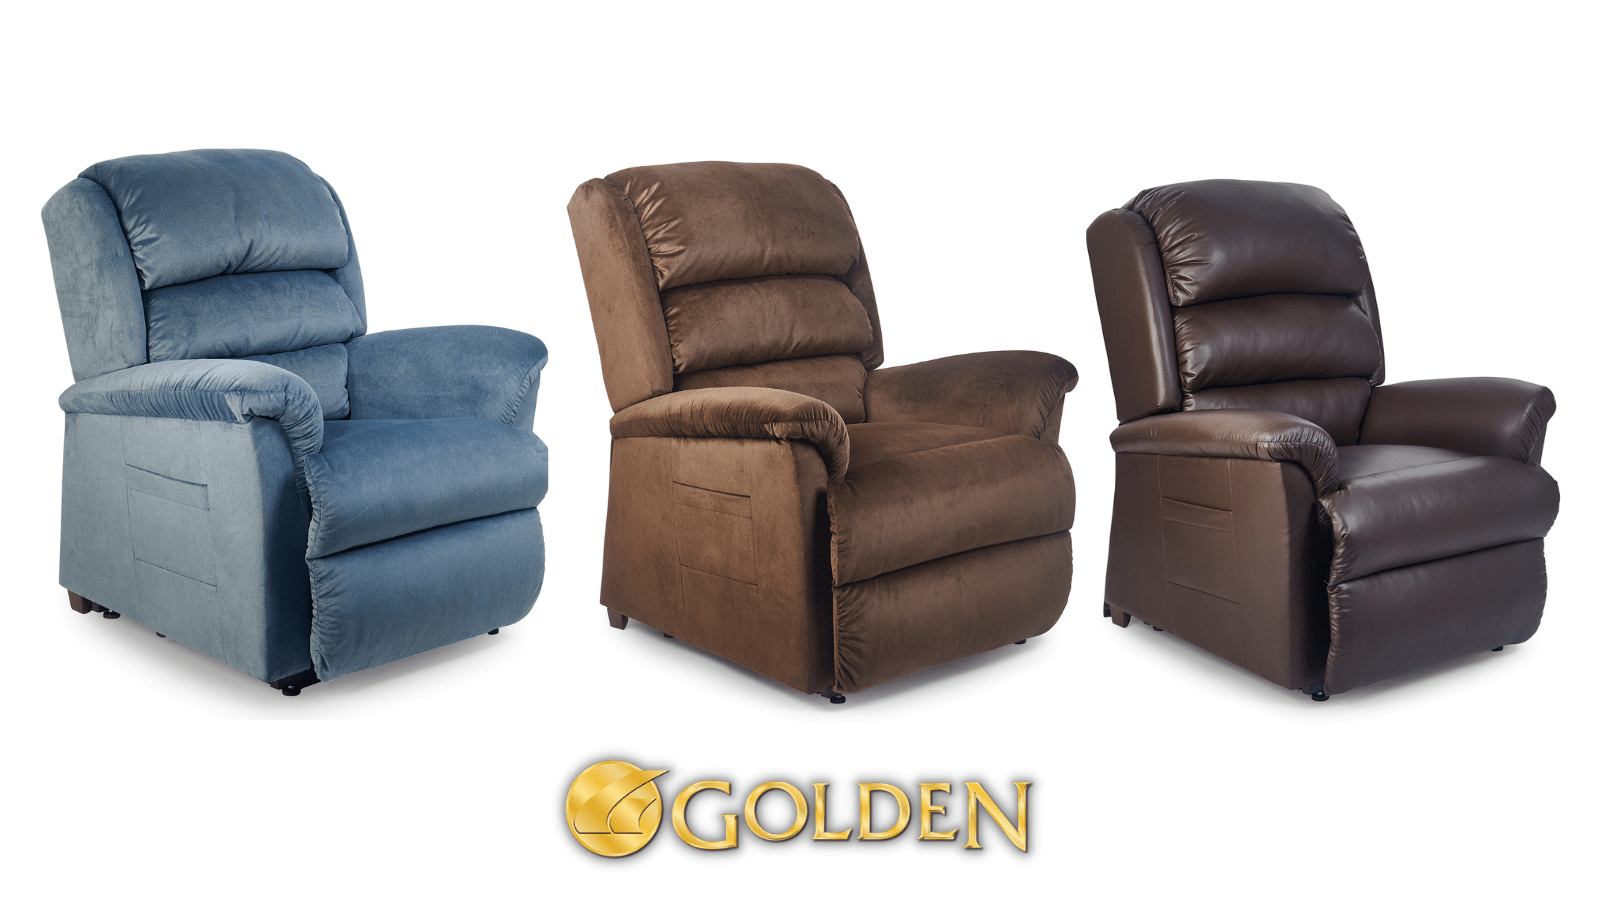 Golden Offers Fastest Lead Times for Lift Recliners & Adds Models